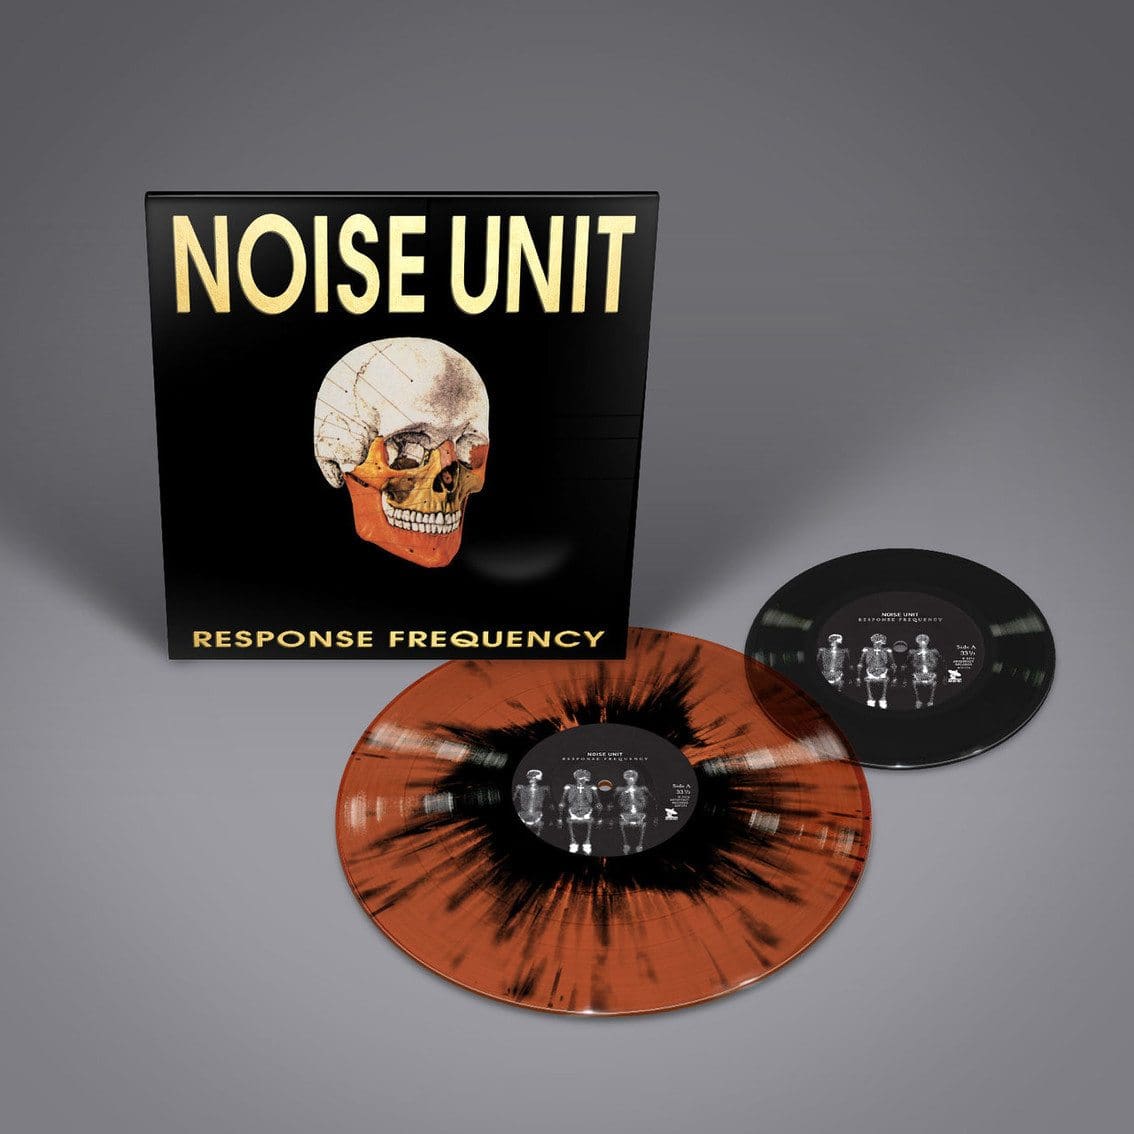 3 new Noise Unit to be re-released as deluxe vinyl sets - full order info